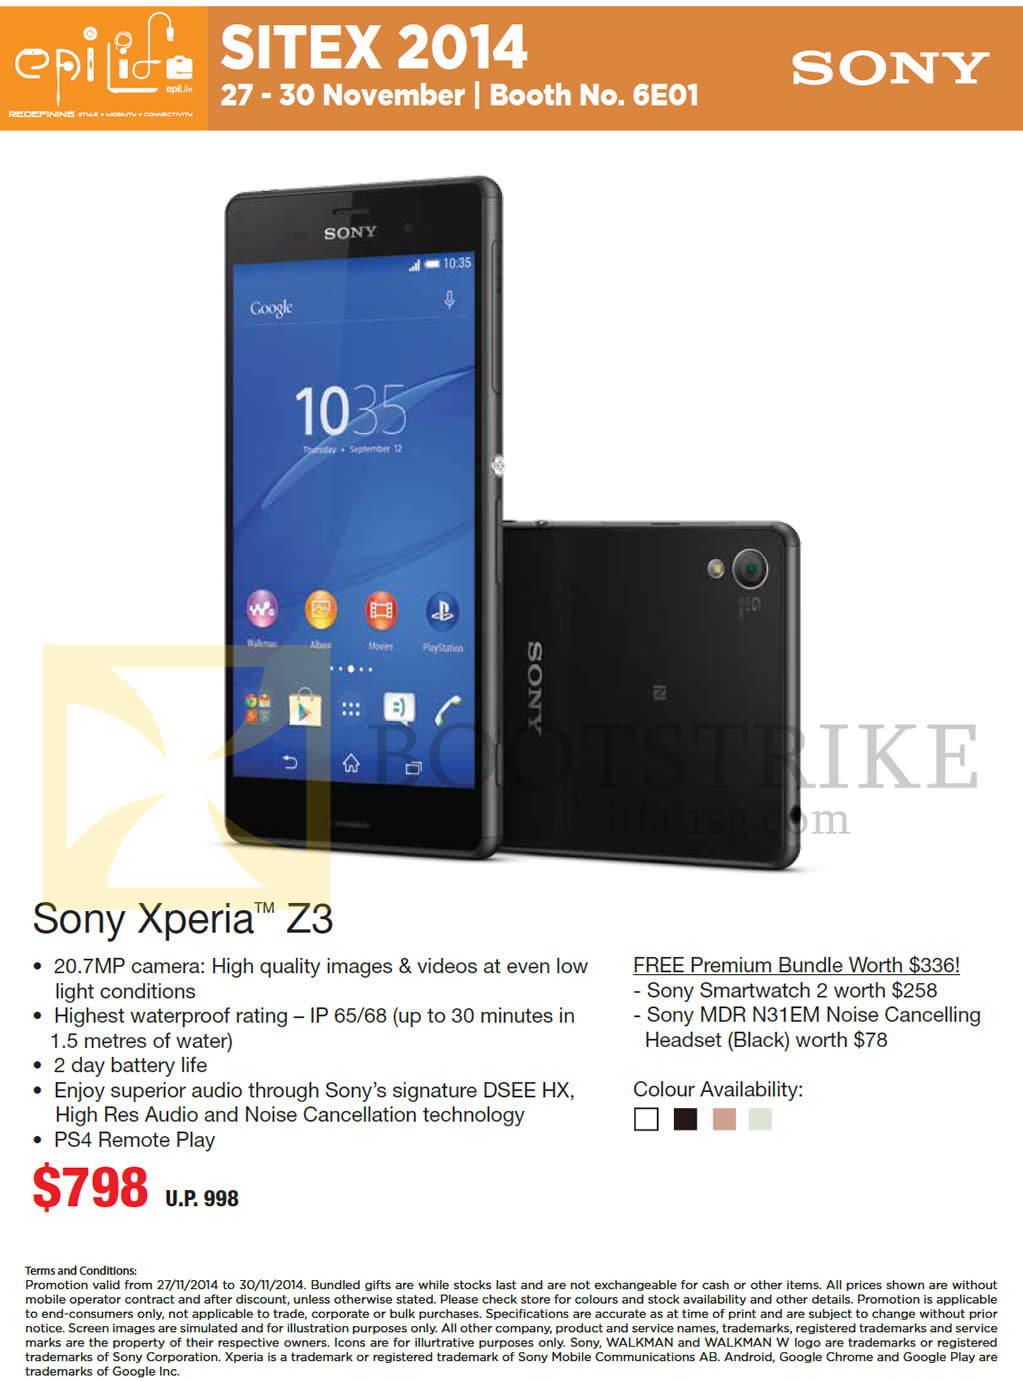 SITEX 2014 price list image brochure of Epicentre Sony Xperia Z3